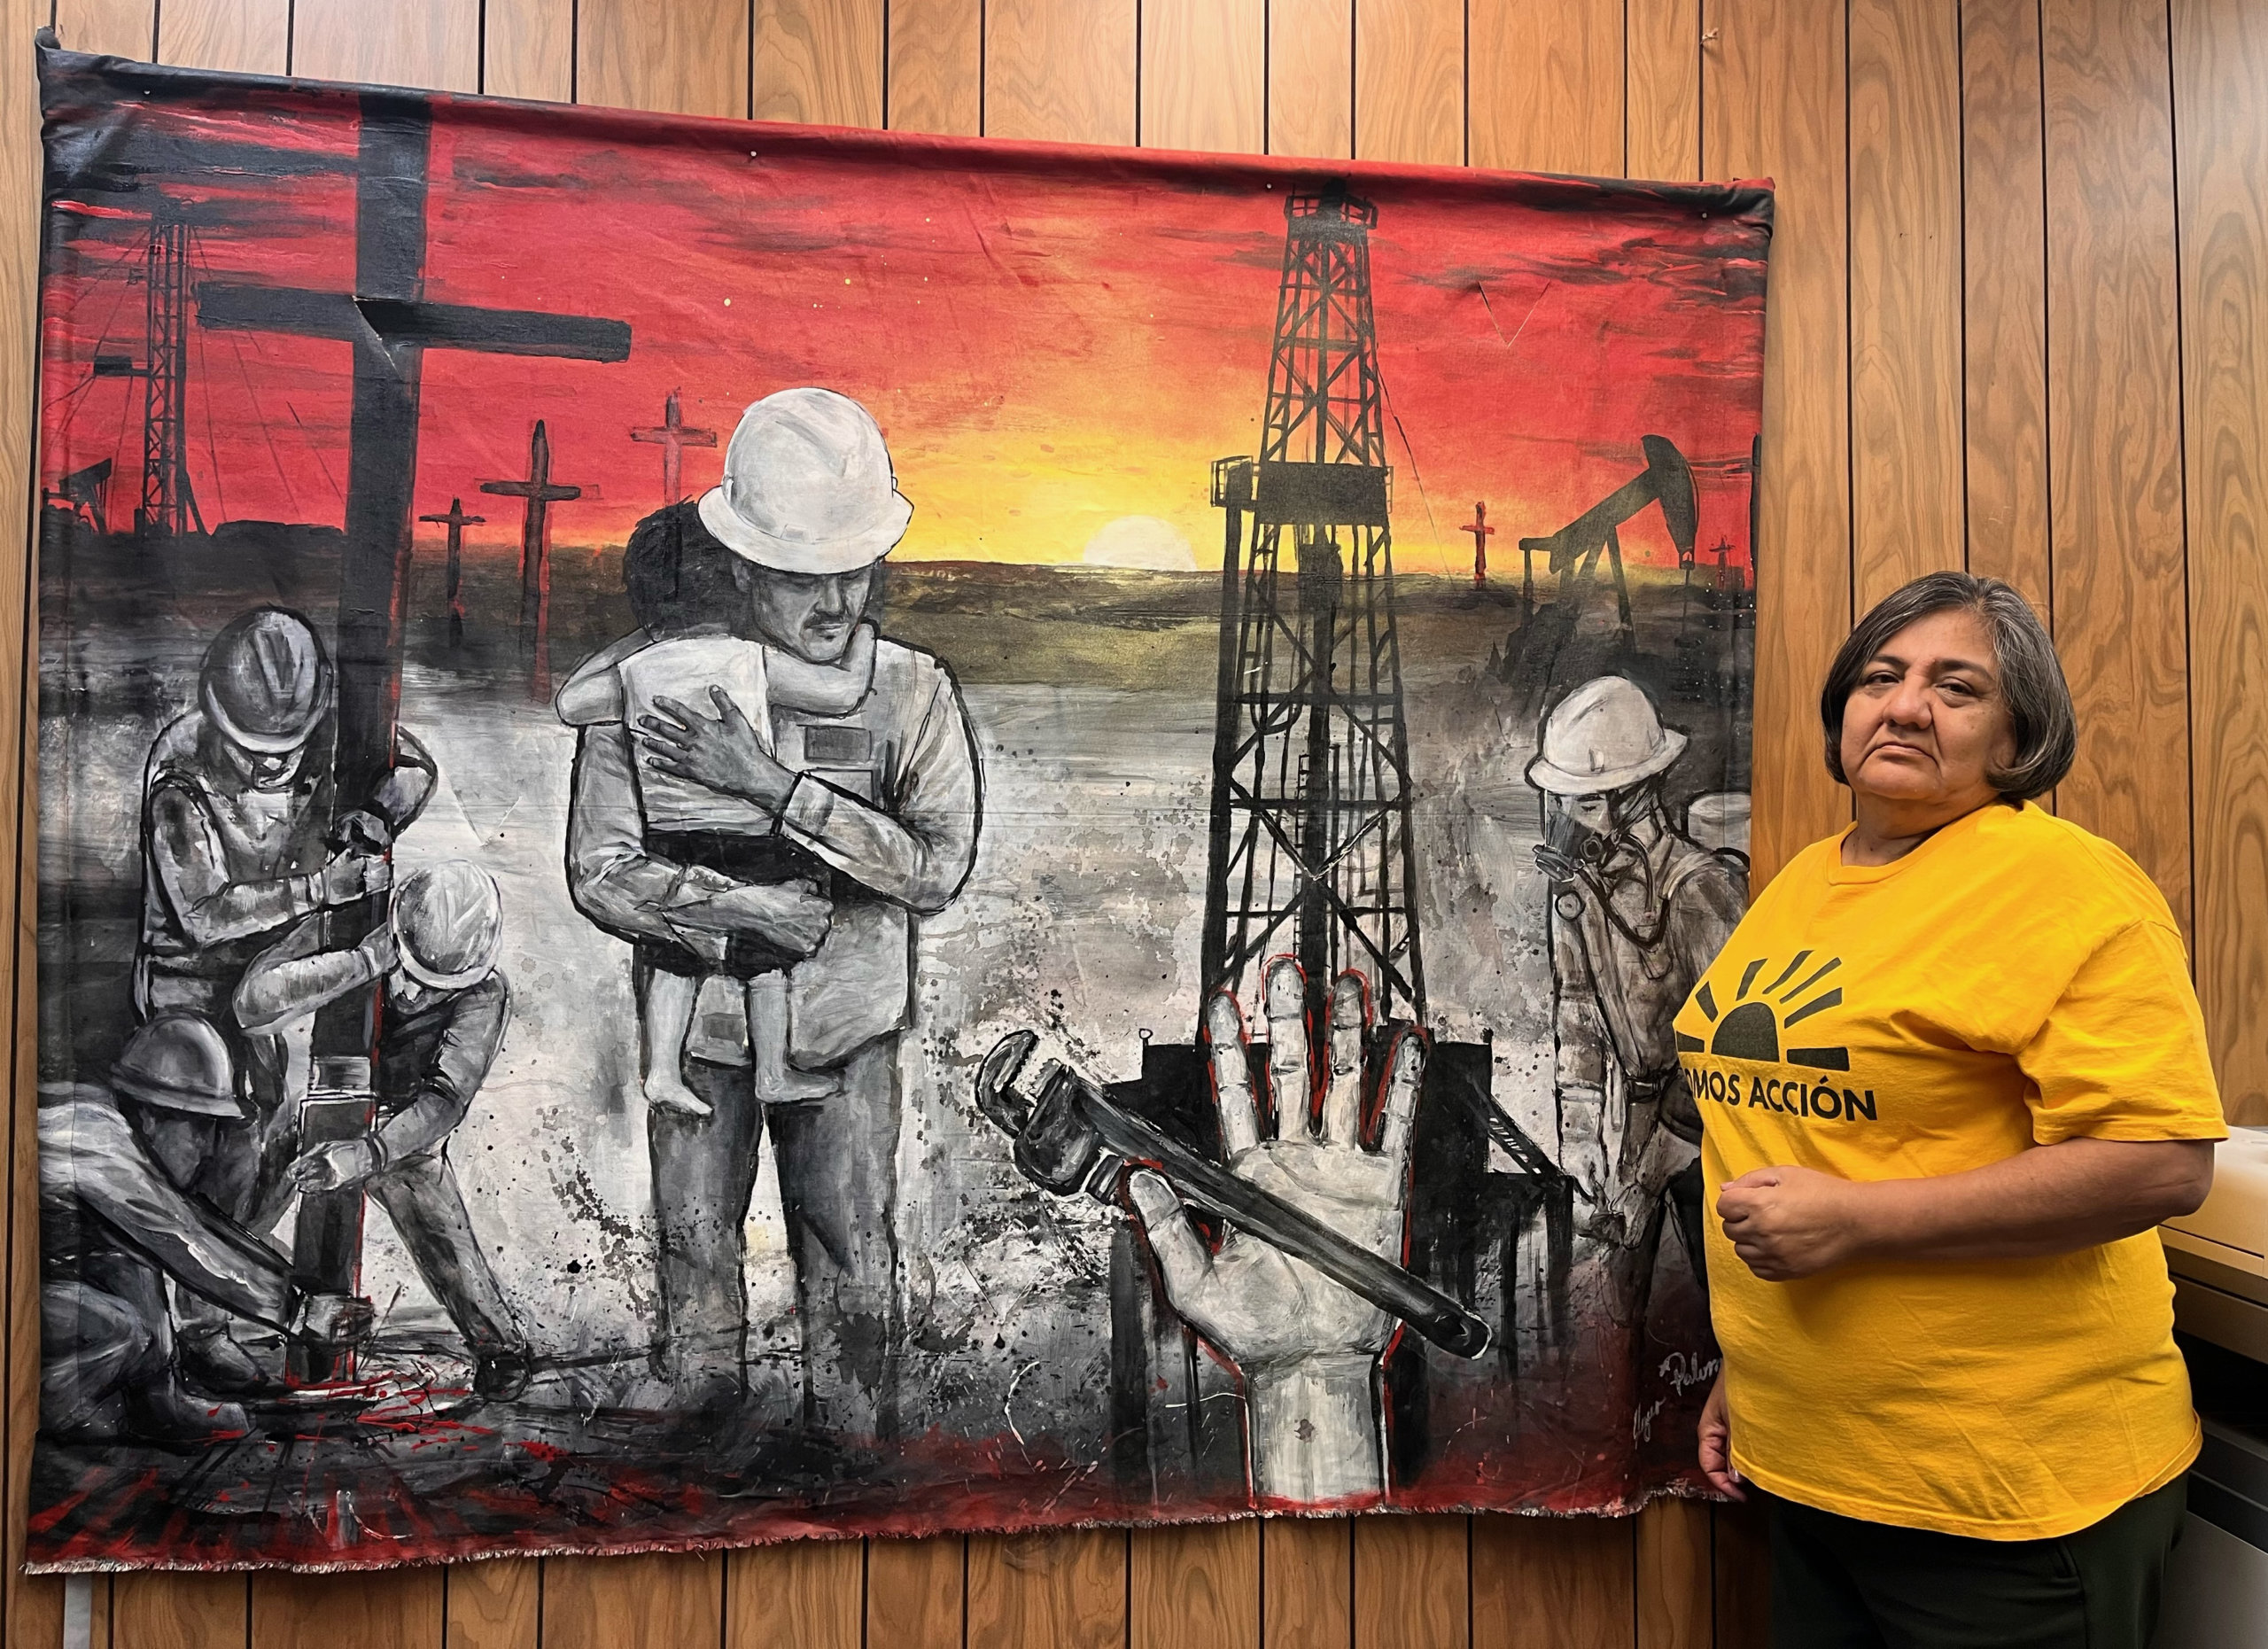 Immigrant oil workers in NM support a shift to clean energy